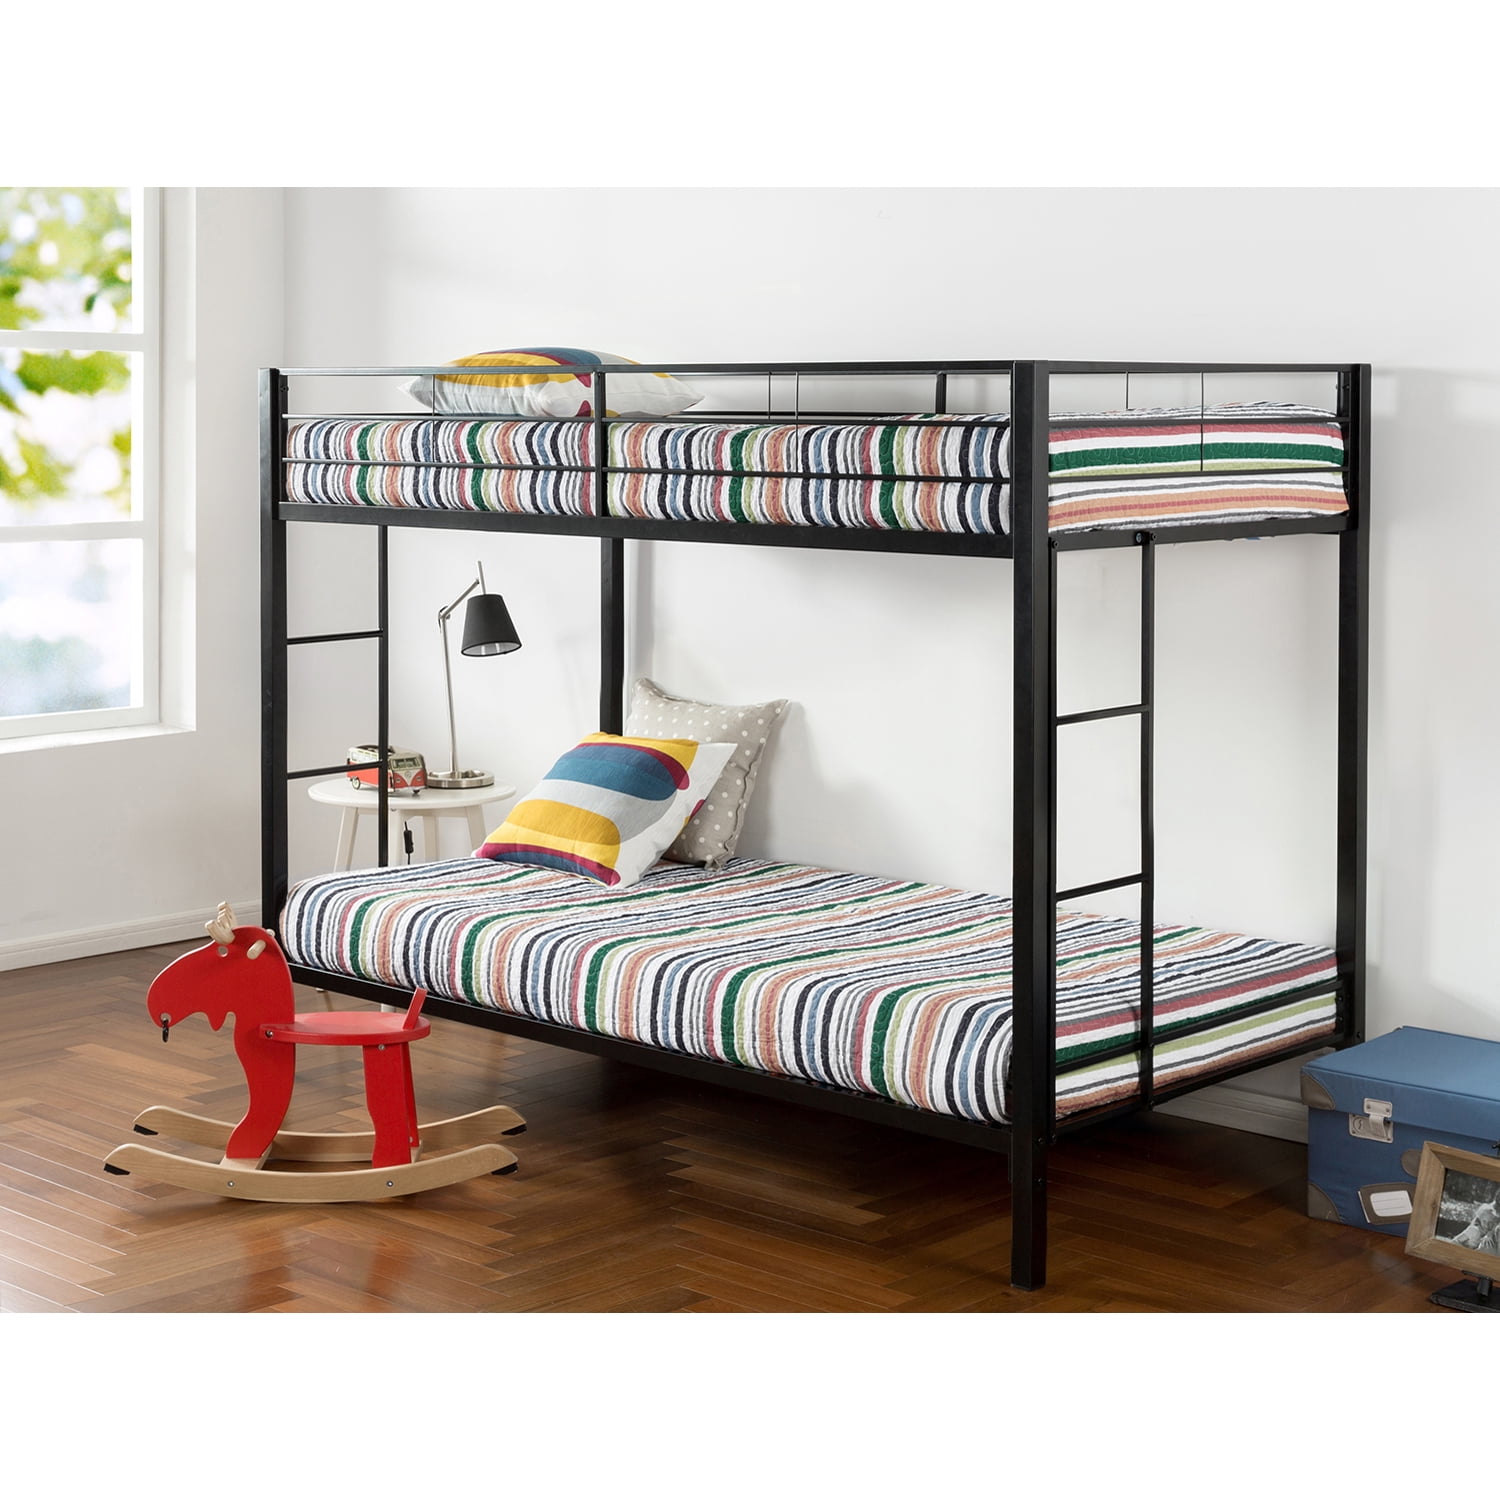 Blue Zinus Easy Assembly Quick Lock Metal Bunk Bed Dual Ladders Twin Over Twin